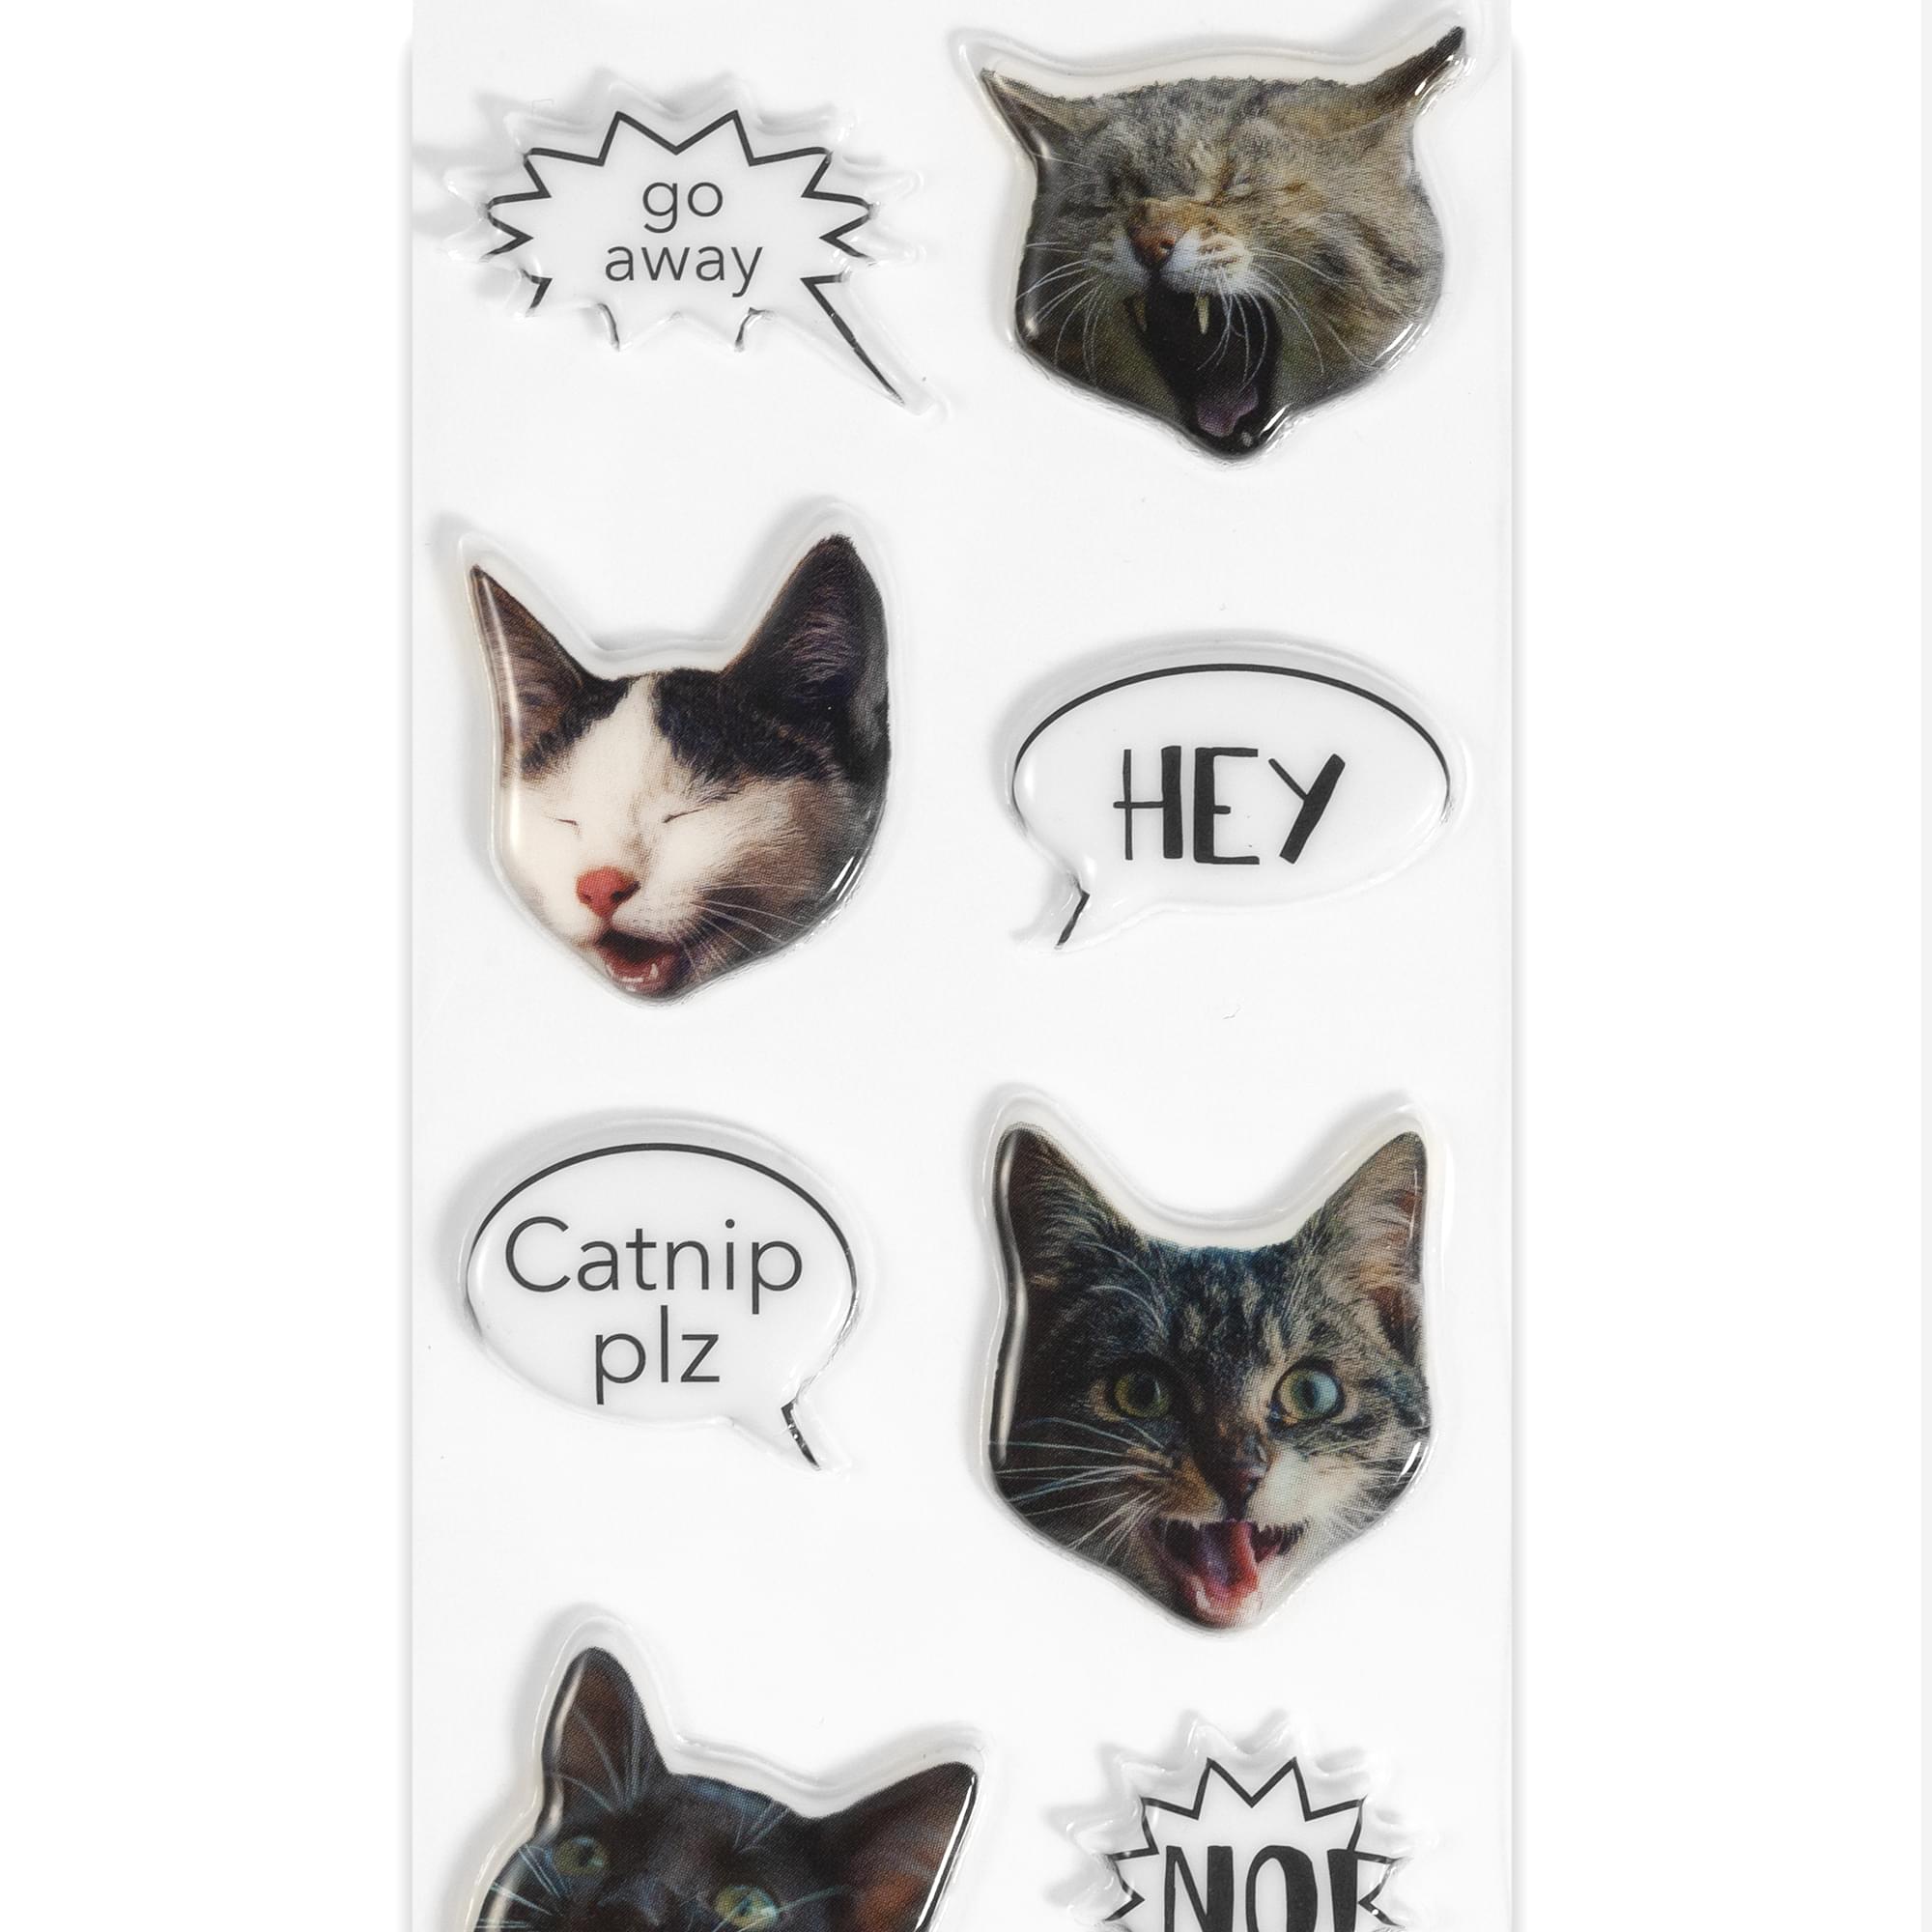 Puffy Adorable Cat Stickers For Note Book & Journal Decorations